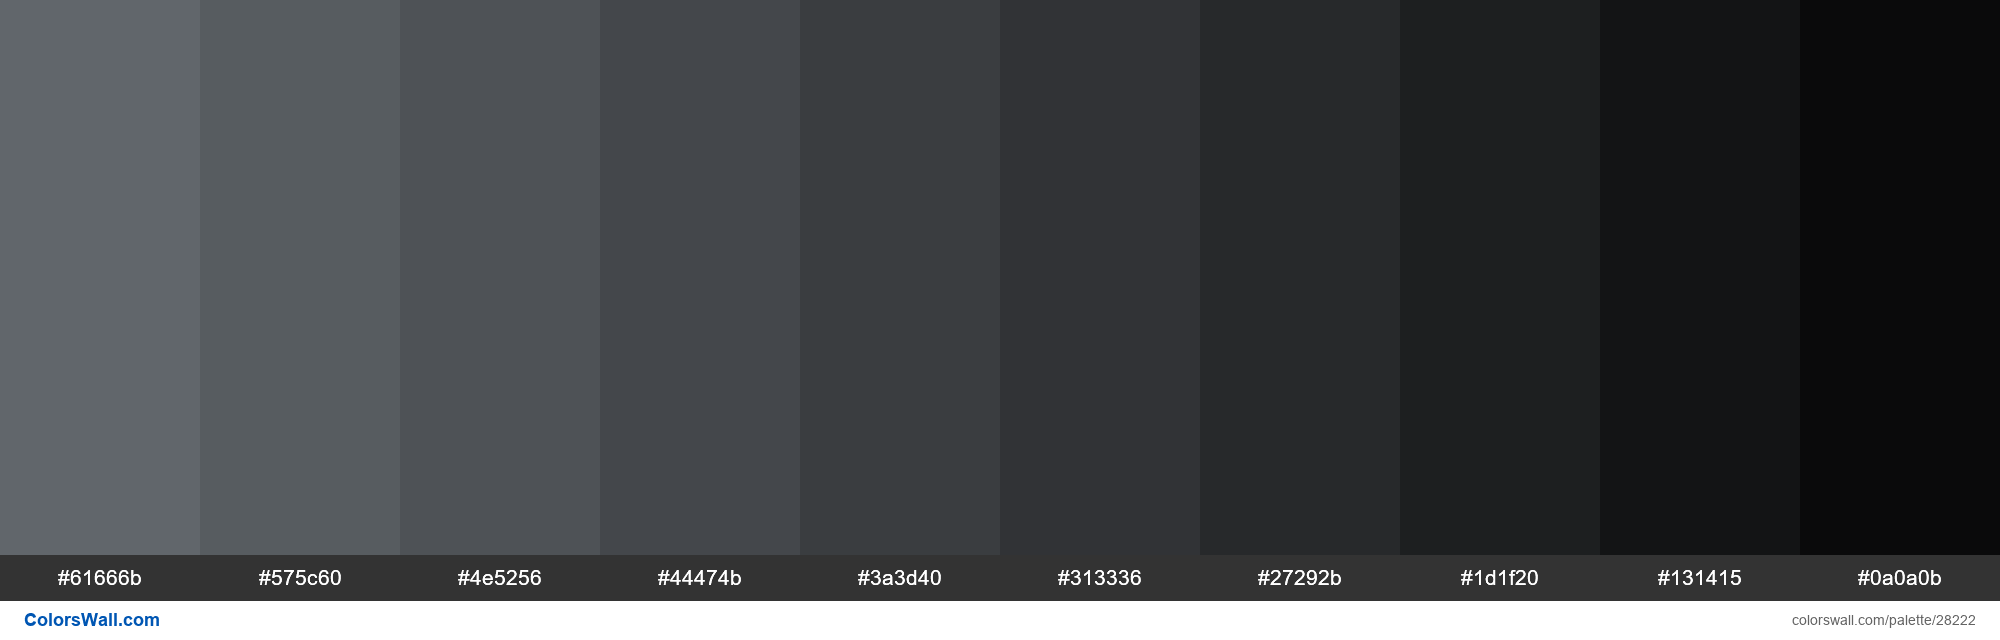 Shades of Shuttle Grey color #61666B hex - ColorsWall